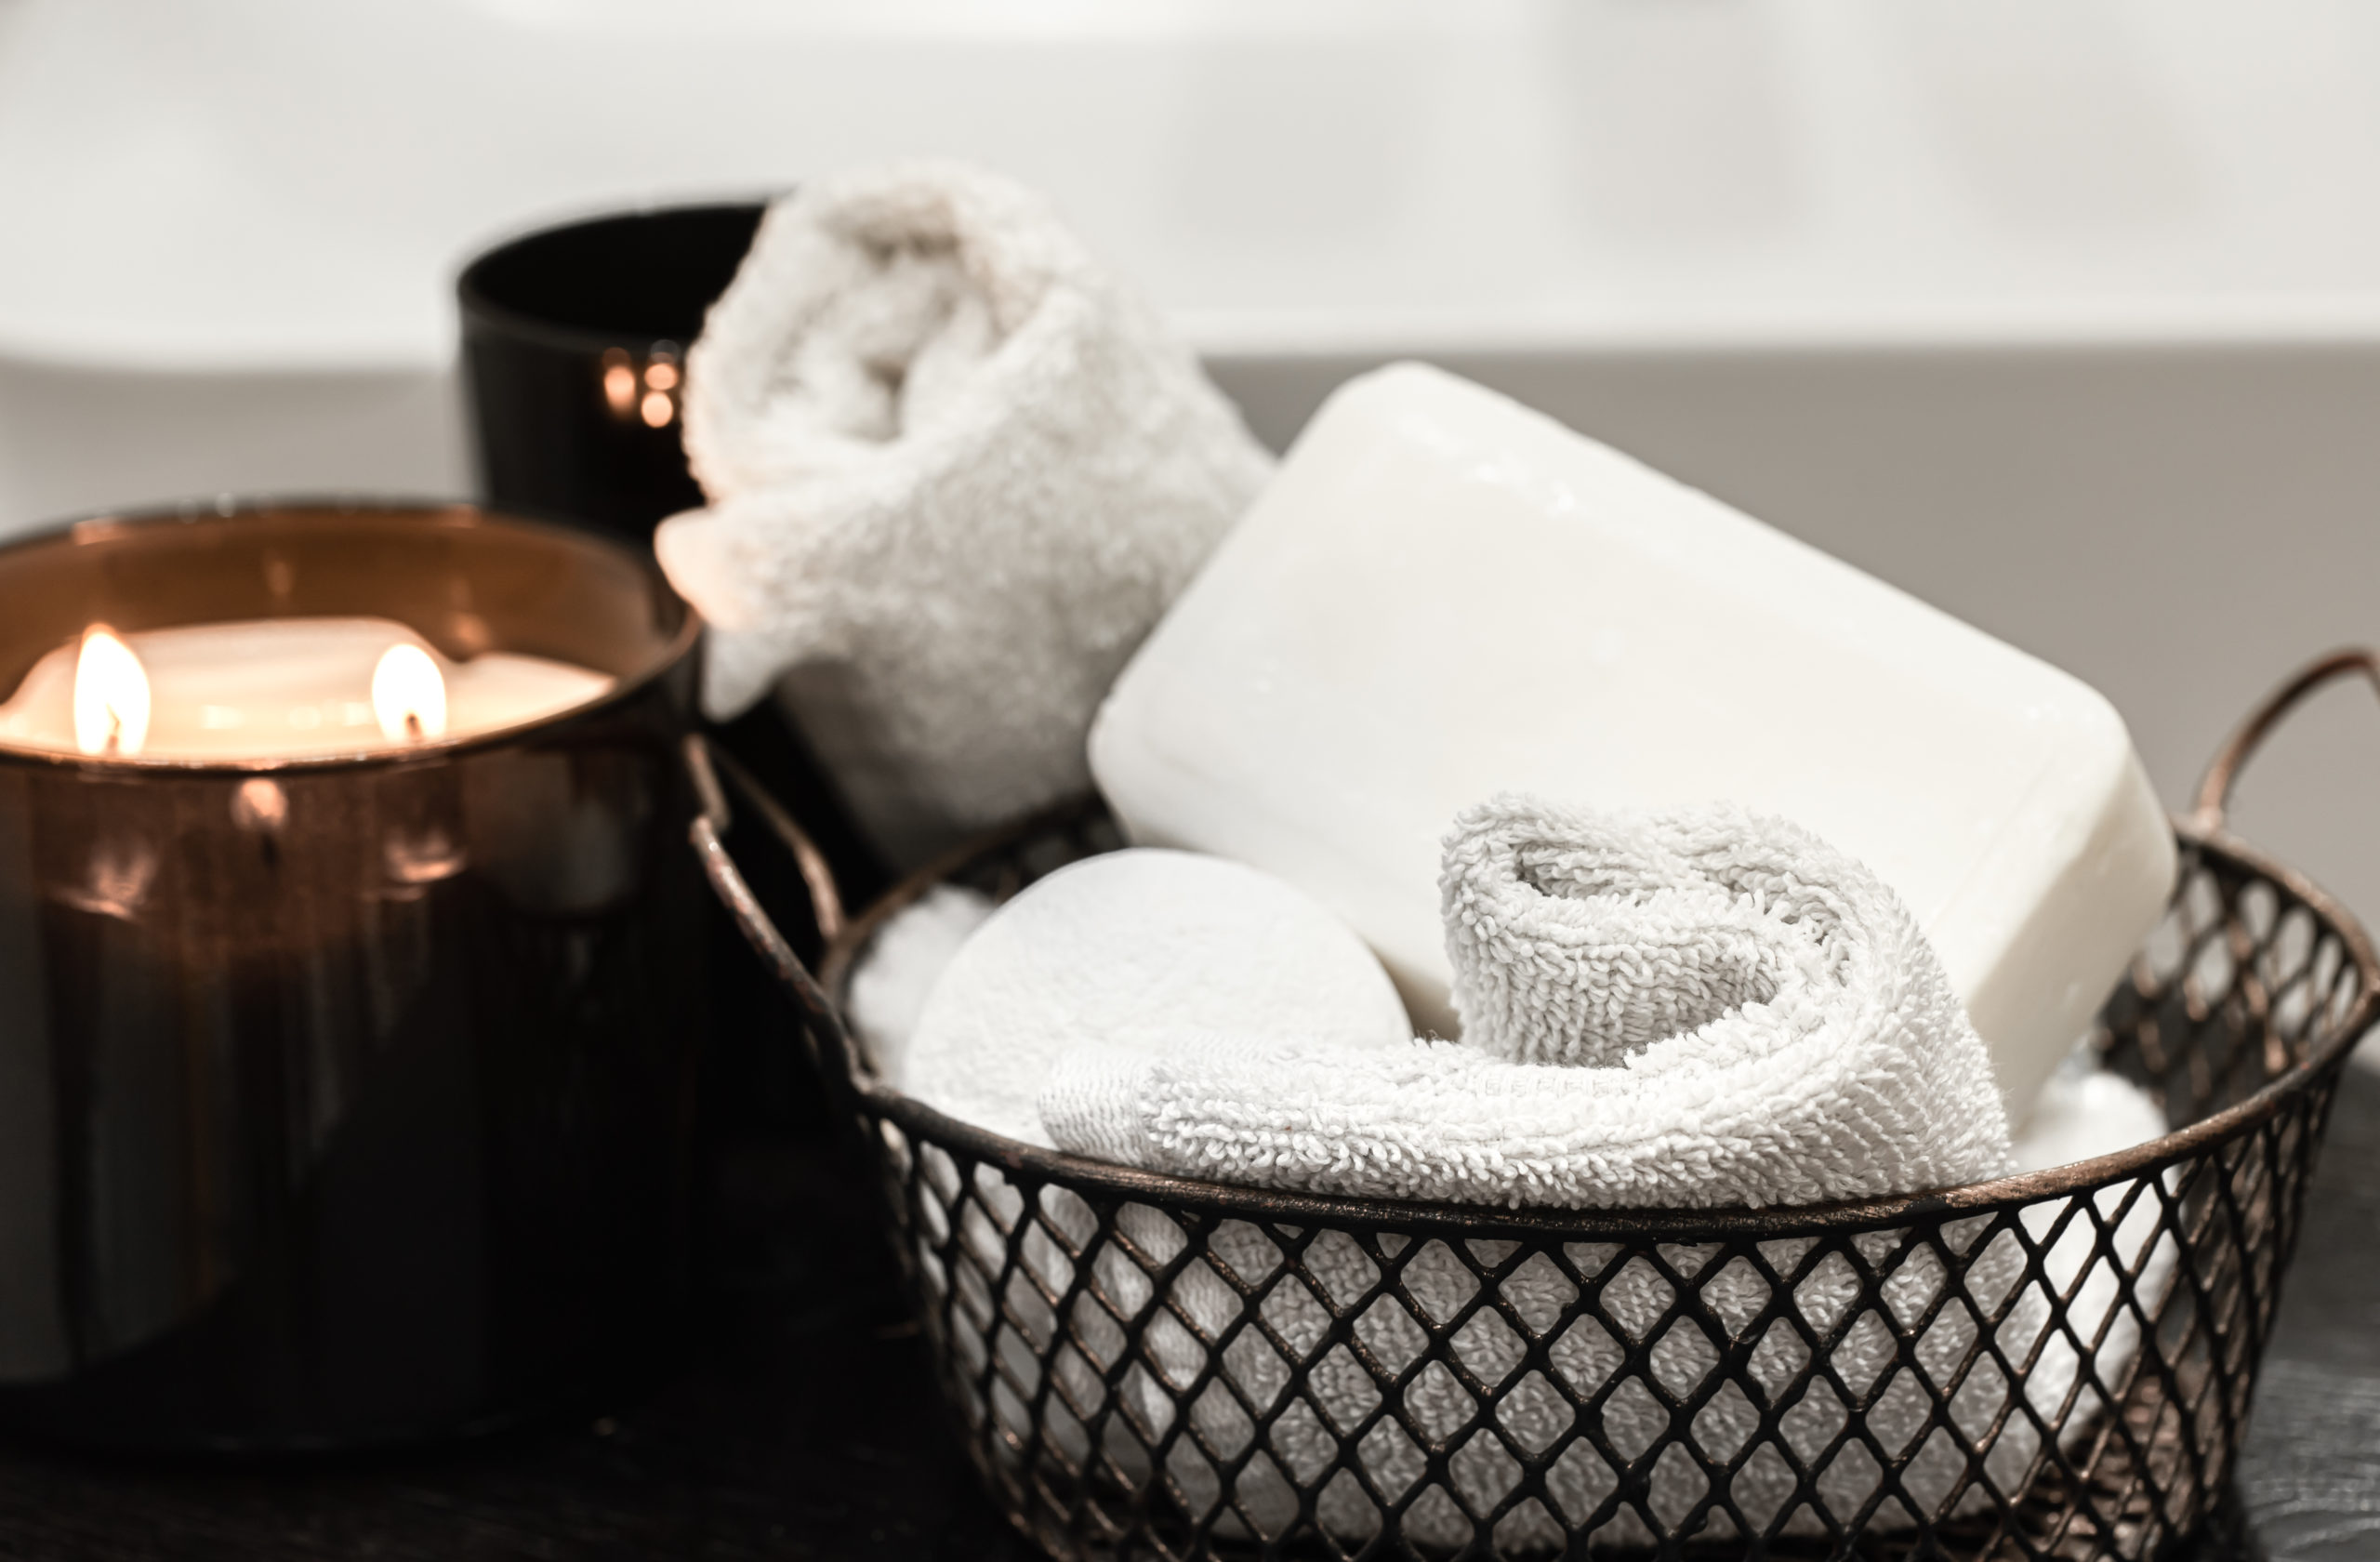 bath-accessories-burning-candle-body-care-hygiene-concept-scaled